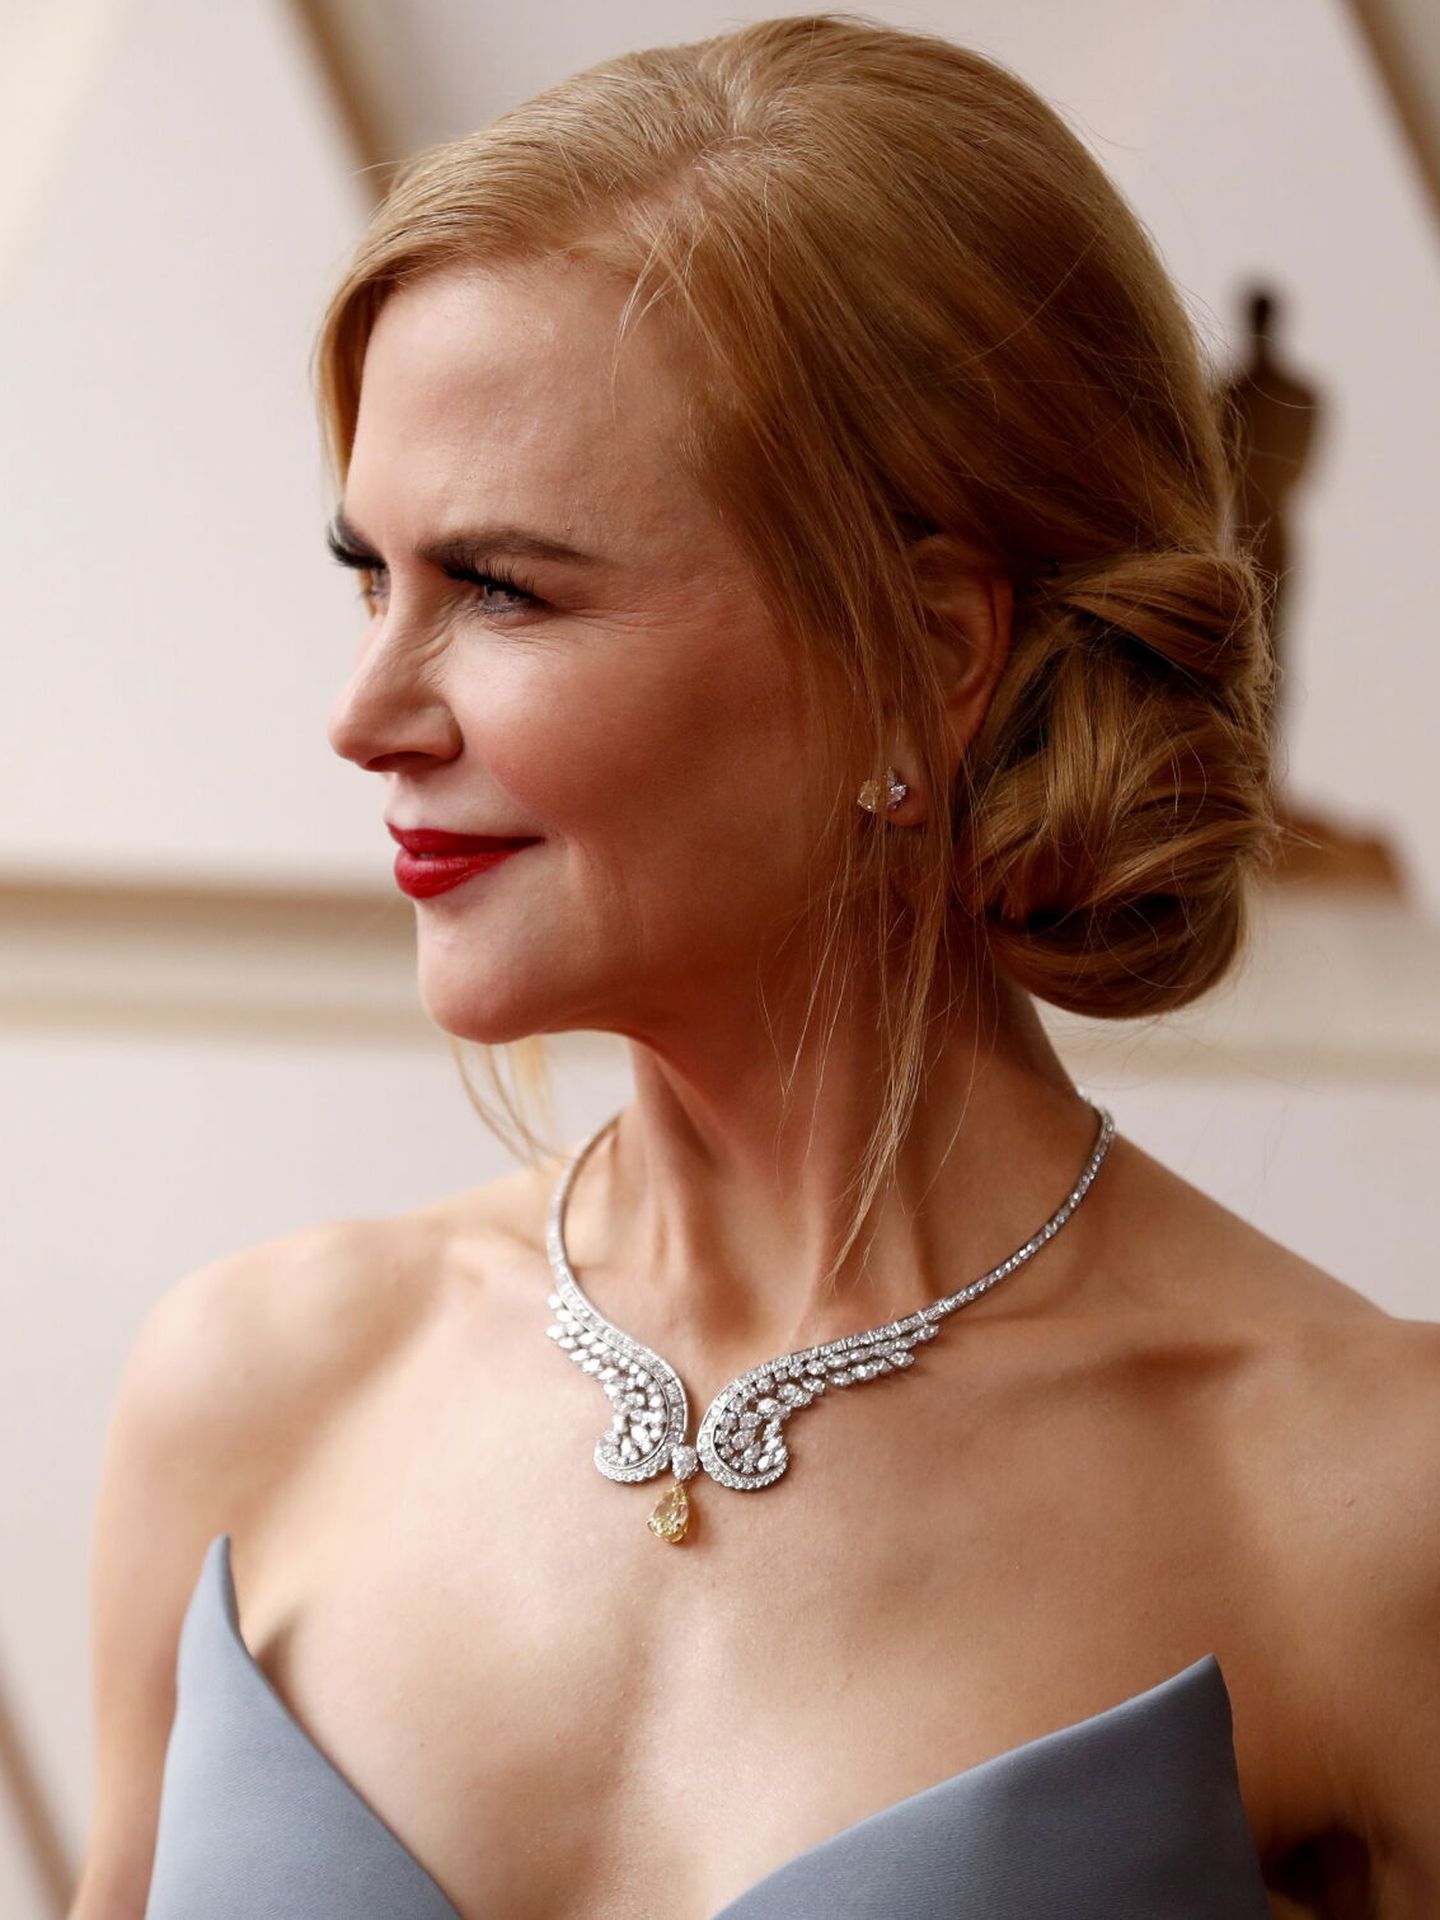 Hollywood (United States), 27 03 2022.- Nicole Kidman arrives for the 94th annual Academy Awards ceremony at the Dolby Theatre in Hollywood, Los Angeles, California, USA, 27 March 2022. The Oscars are presented for outstanding individual or collective efforts in filmmaking in 24 categories. (Estados Unidos) EFE EPA DAVID SWANSON 